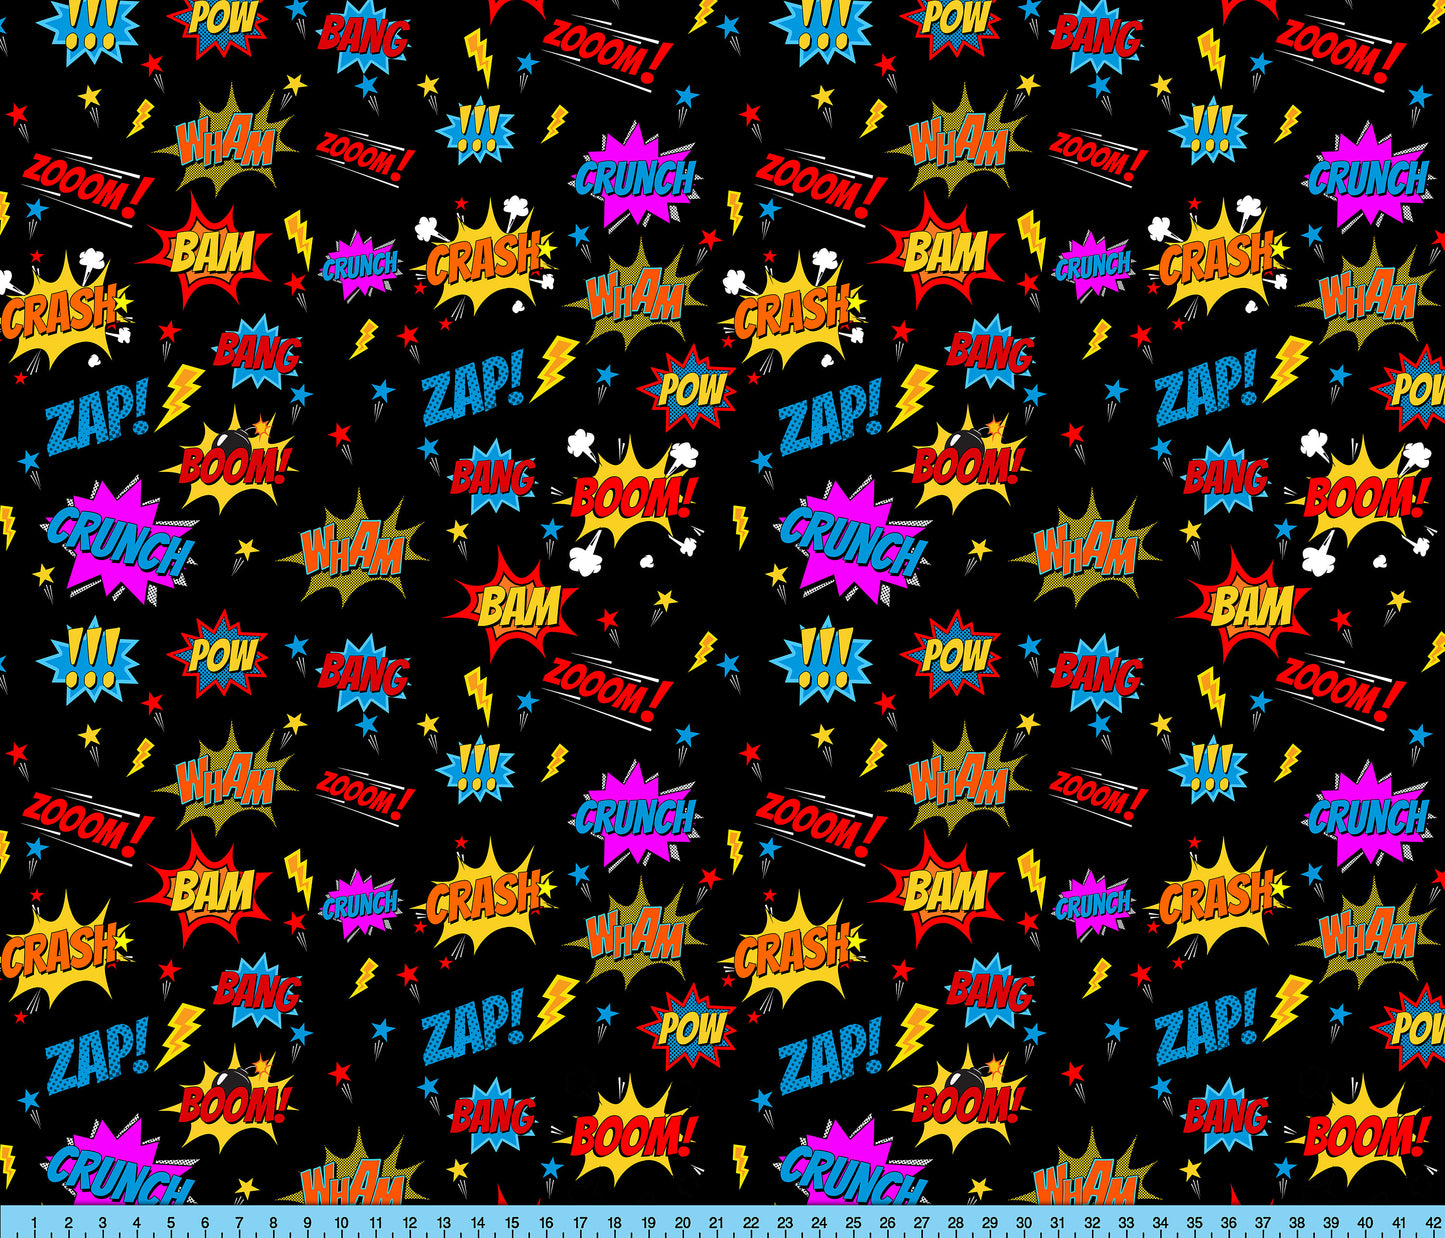 Comic Book Sound Effects Fabric Pattern, Novelty Design Fabric By The Yard